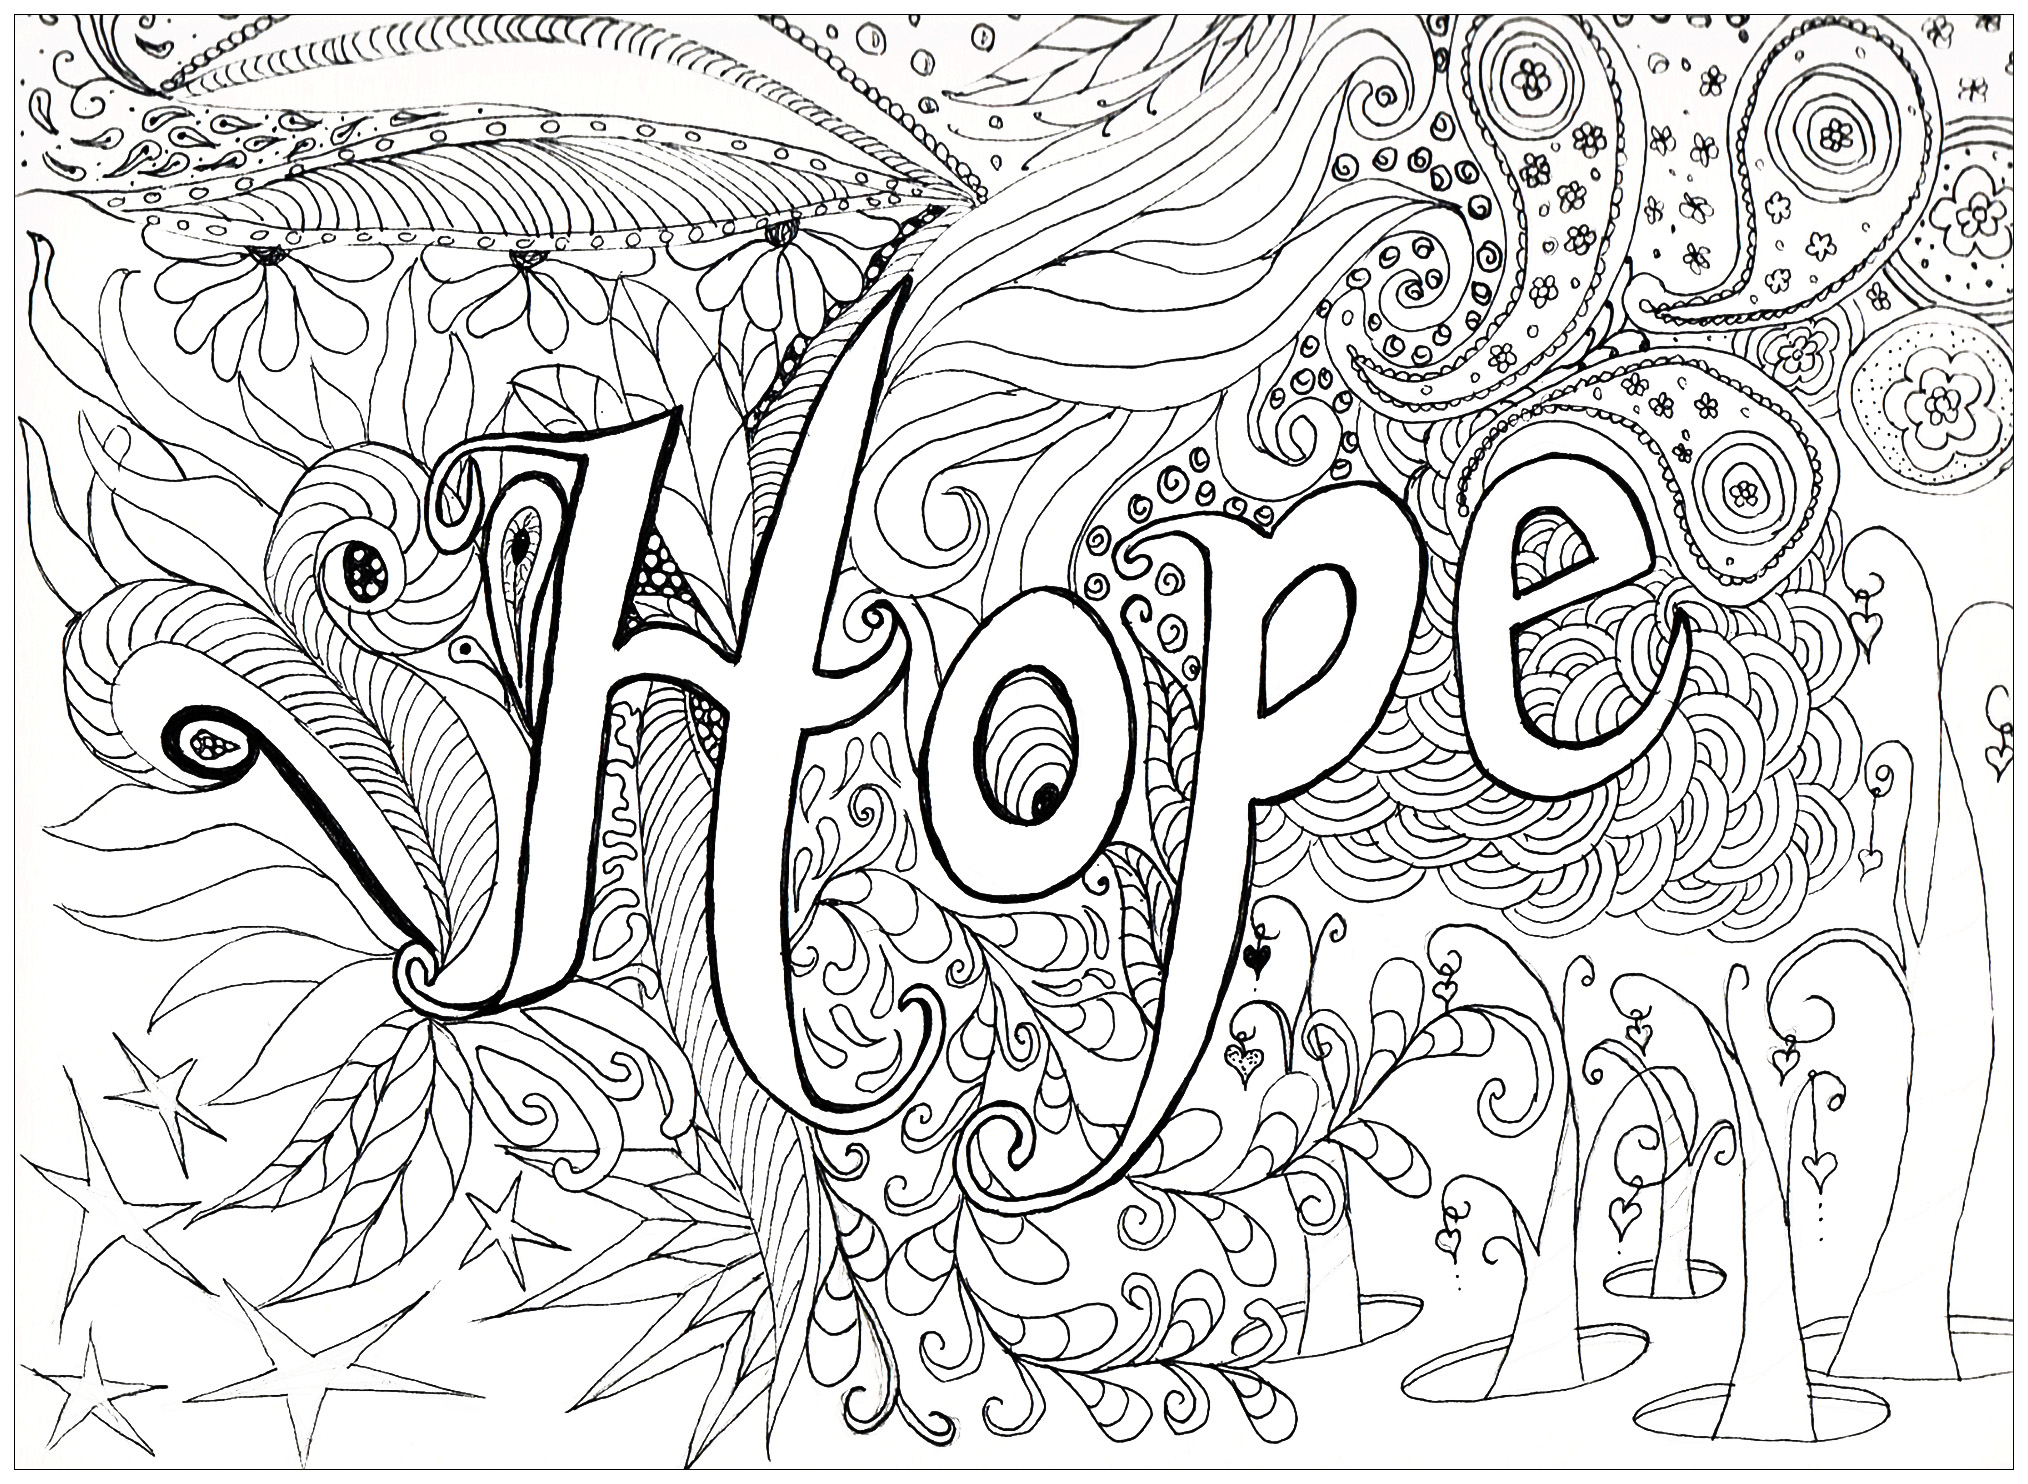 66 Coloring Pages Adults To Print For Free